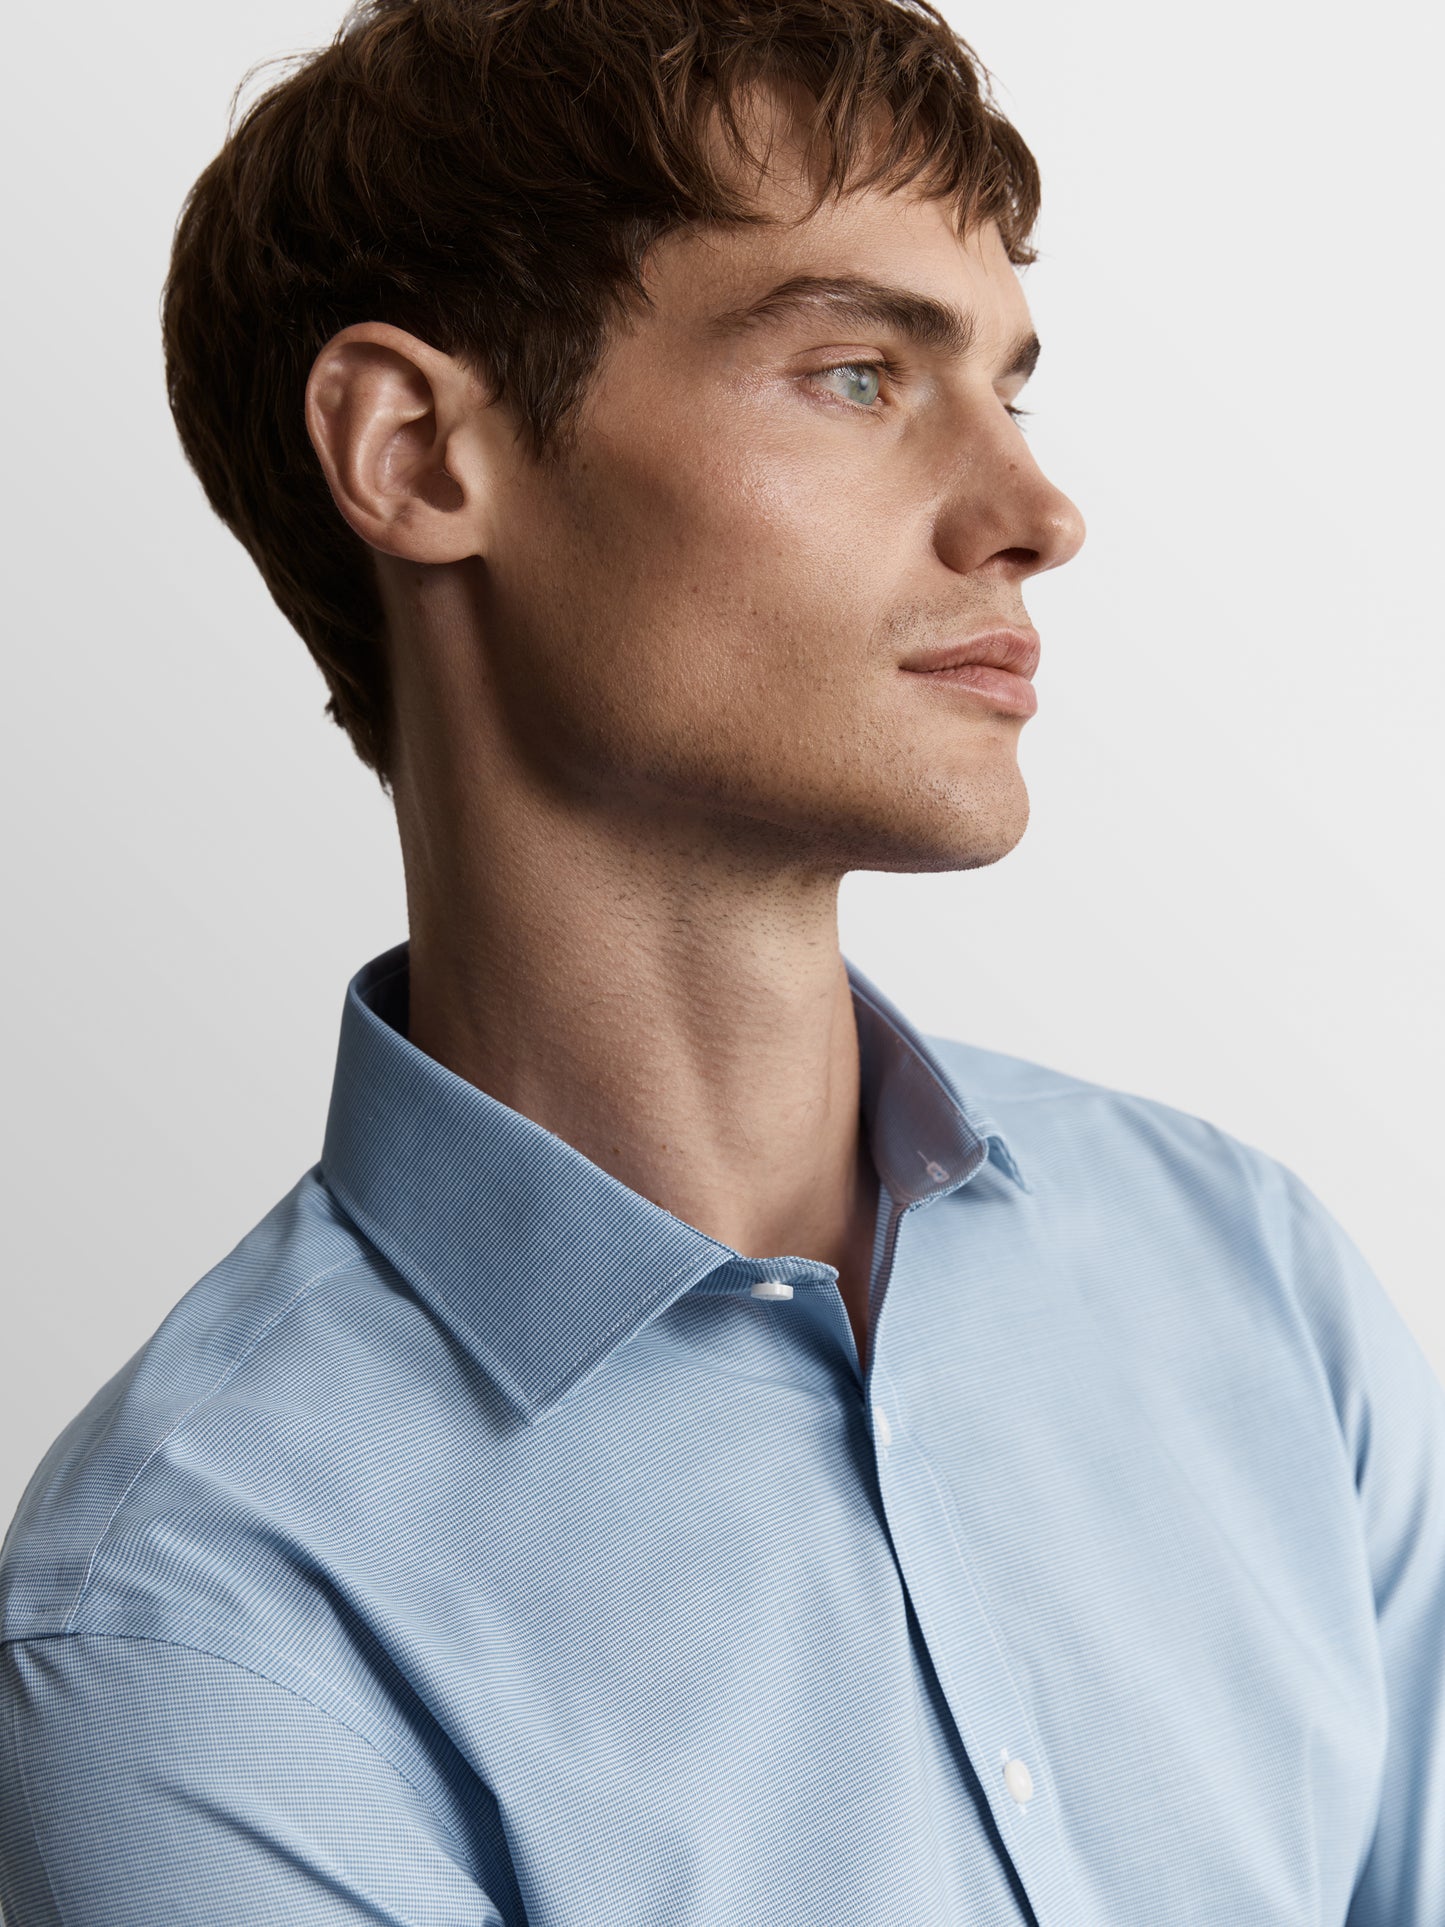 Image 1 of Max Performance Blue Puppytooth Plain Weave Slim Fit Single Cuff Classic Collar Shirt